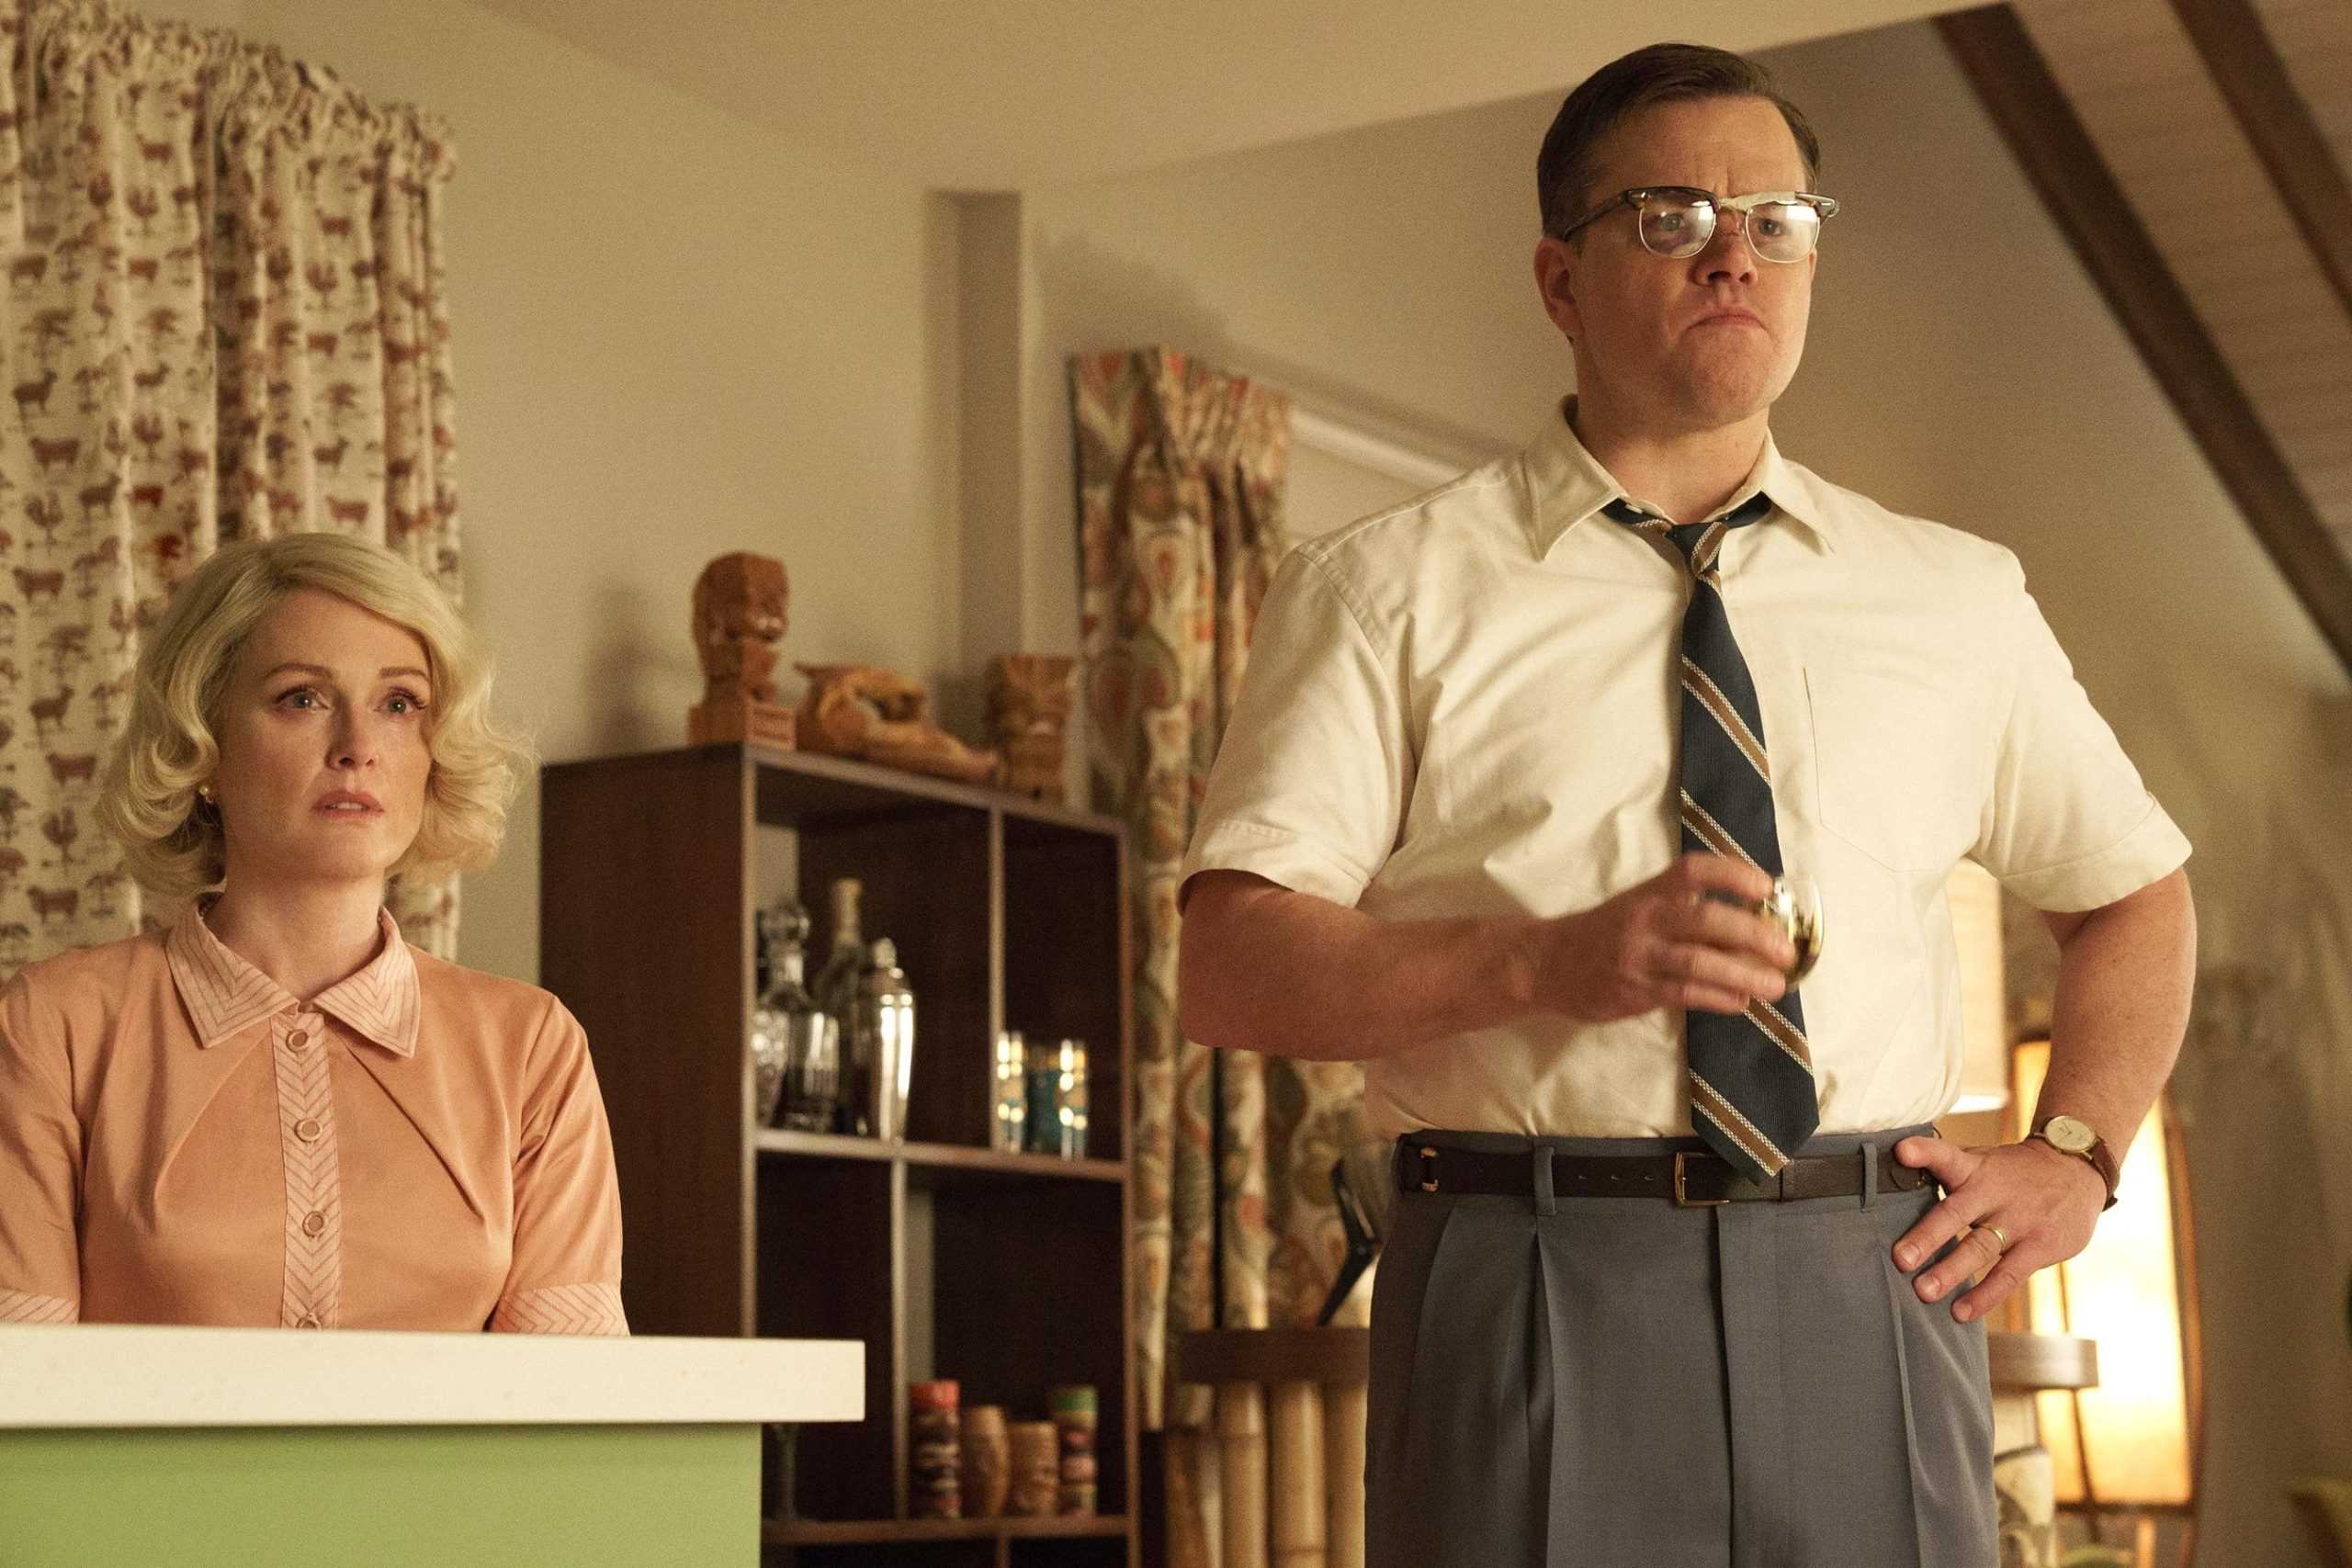 Left to right: Julianne Moore as Margaret and Matt Damon as Gardner in SUBURBICON, from Paramount Pictures and Black Bear Pictures.